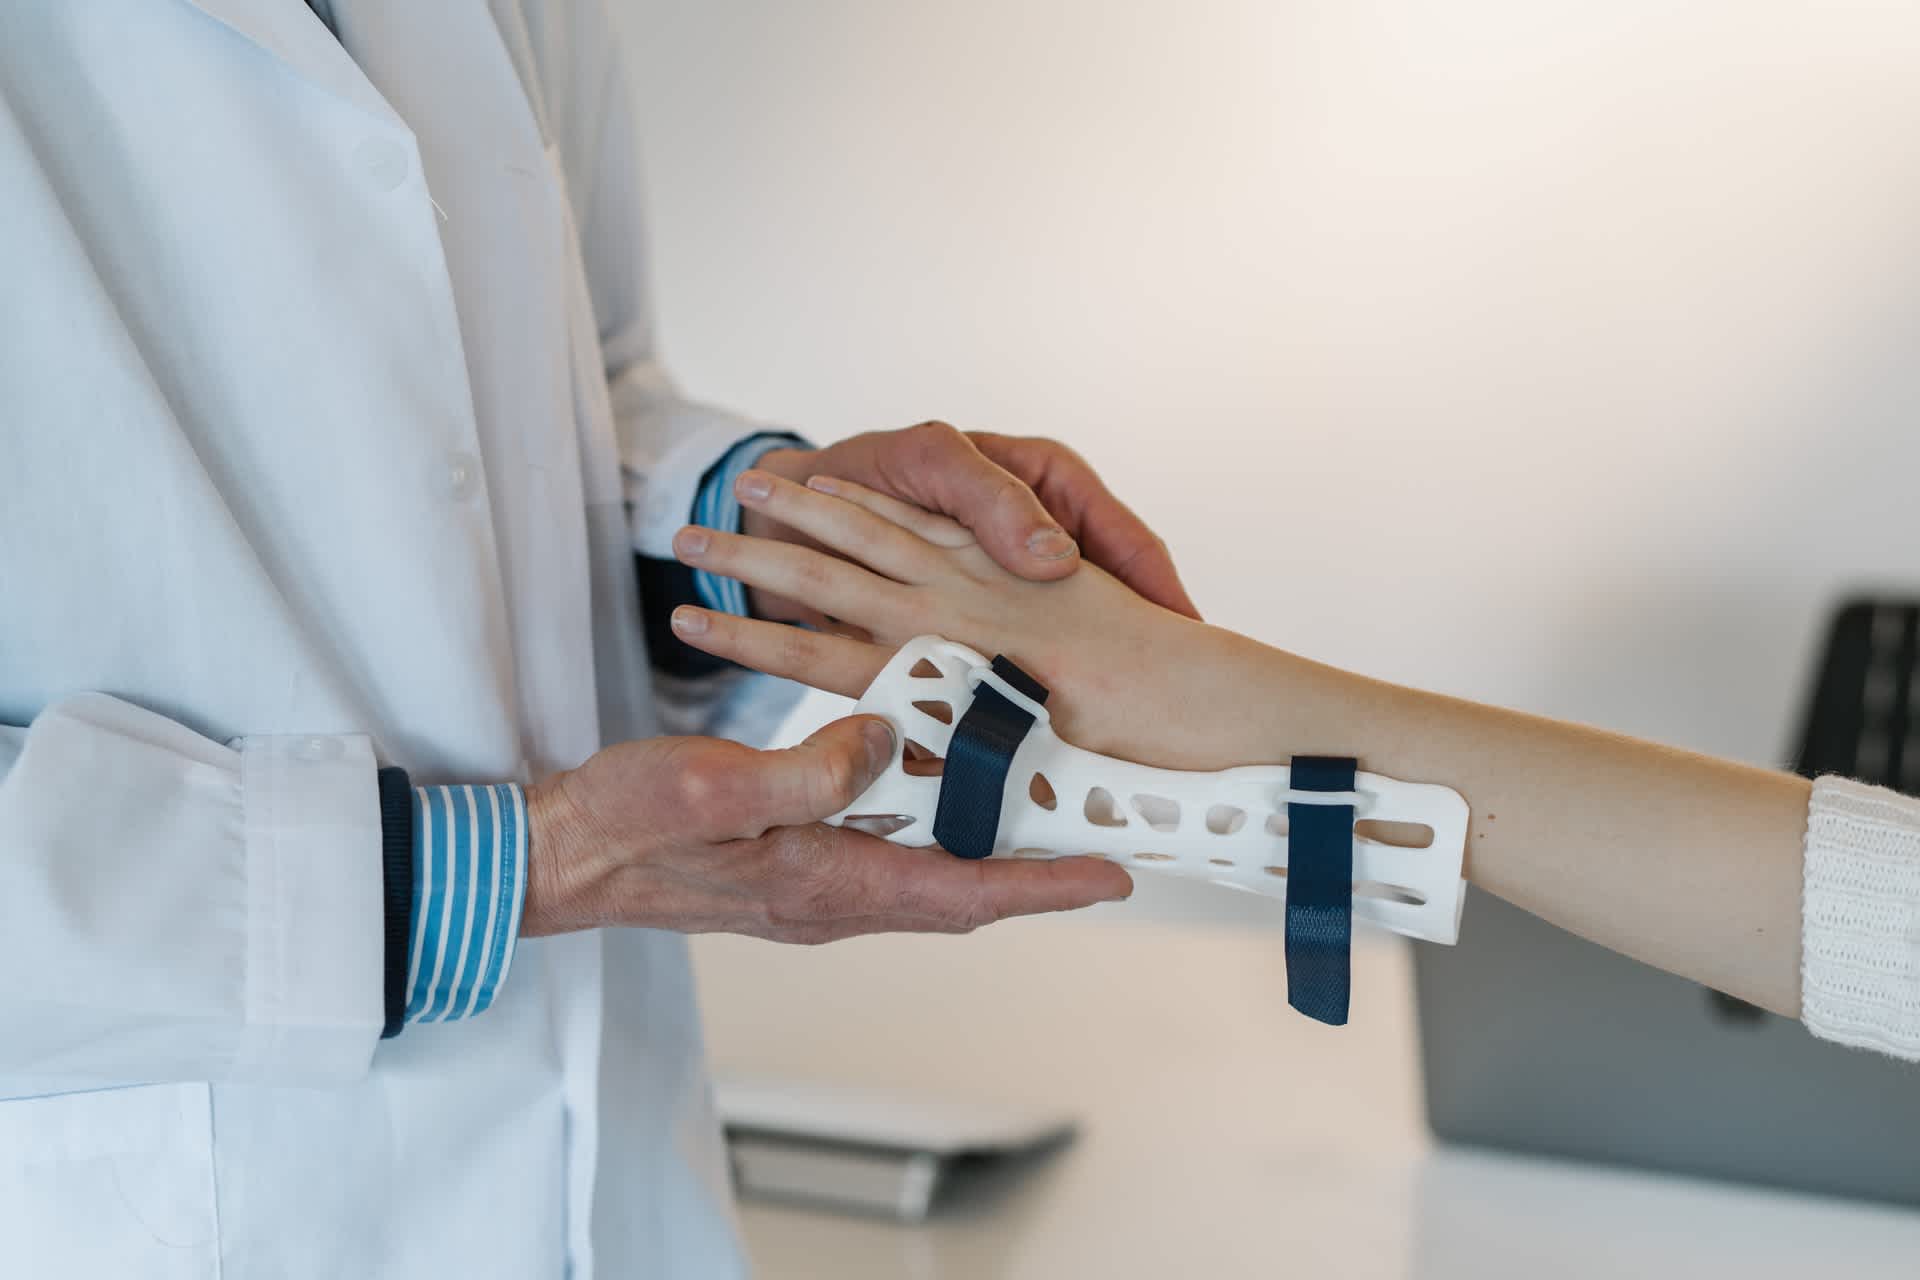 Doctor Putting a Wrist Brace on Patient